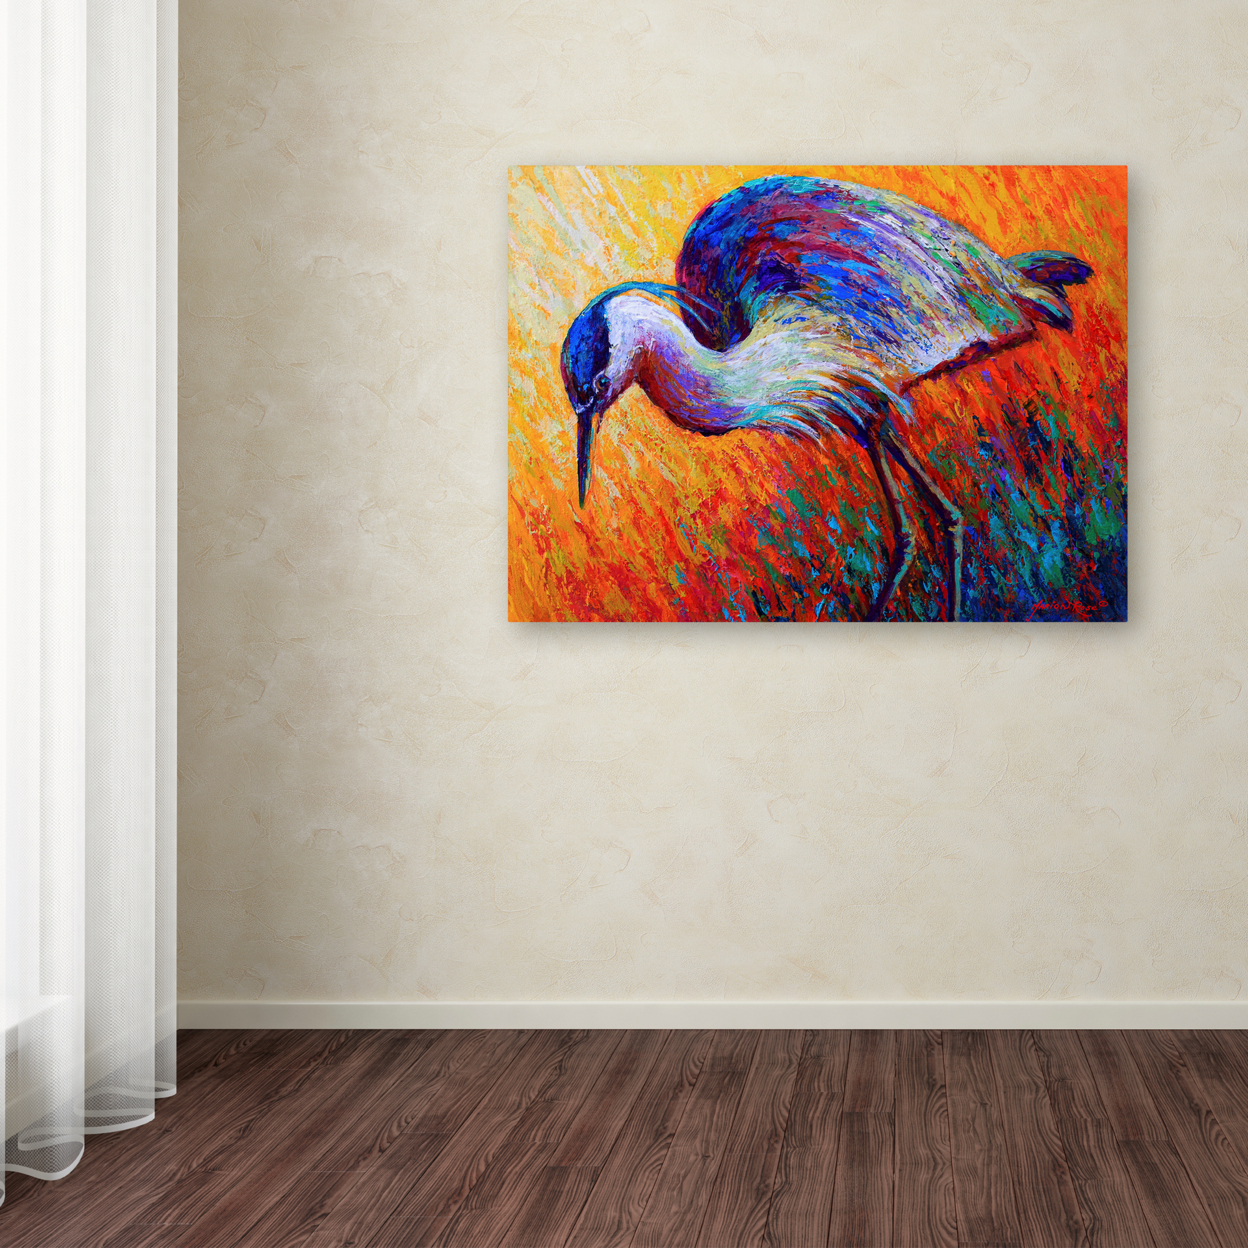 Marion Rose 'Bird Of Dreams' Ready To Hang Canvas Art 14 X 19 Inches Made In USA